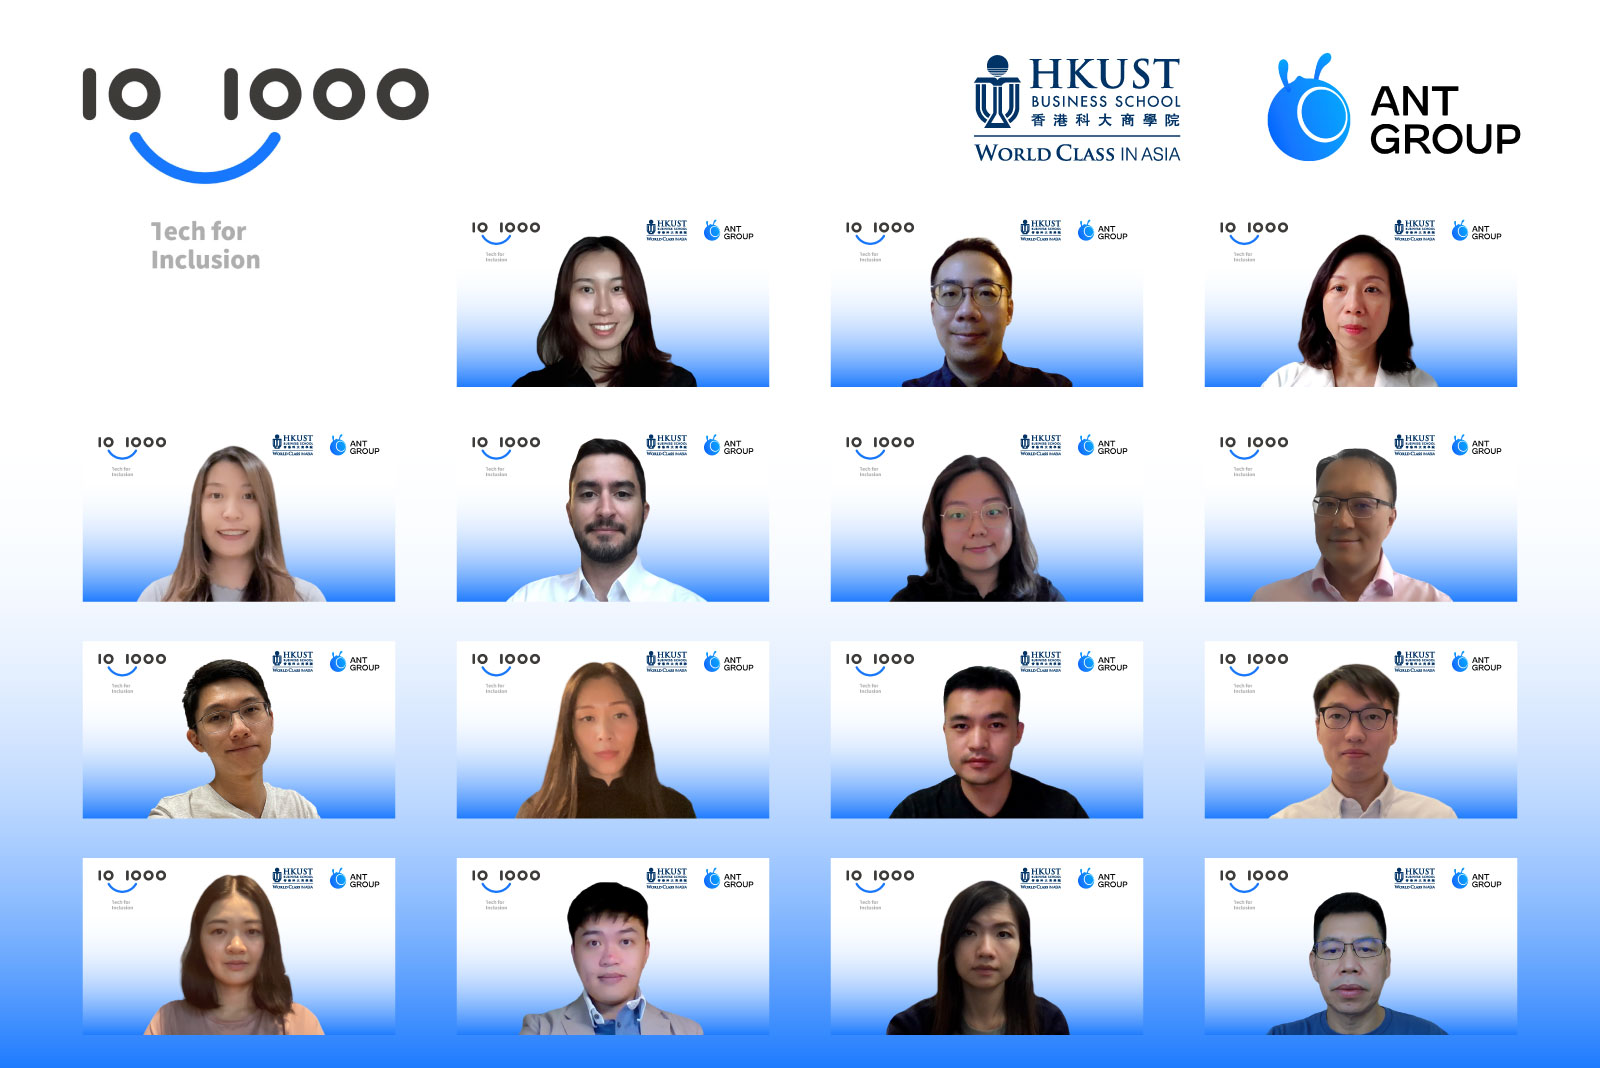 As the first initiative under the MoU between HKUST Business School and the Ant Group on talent development, the 10x1000 Tech for Inclusion program has registered strong demand from the School’s masters degree program students.